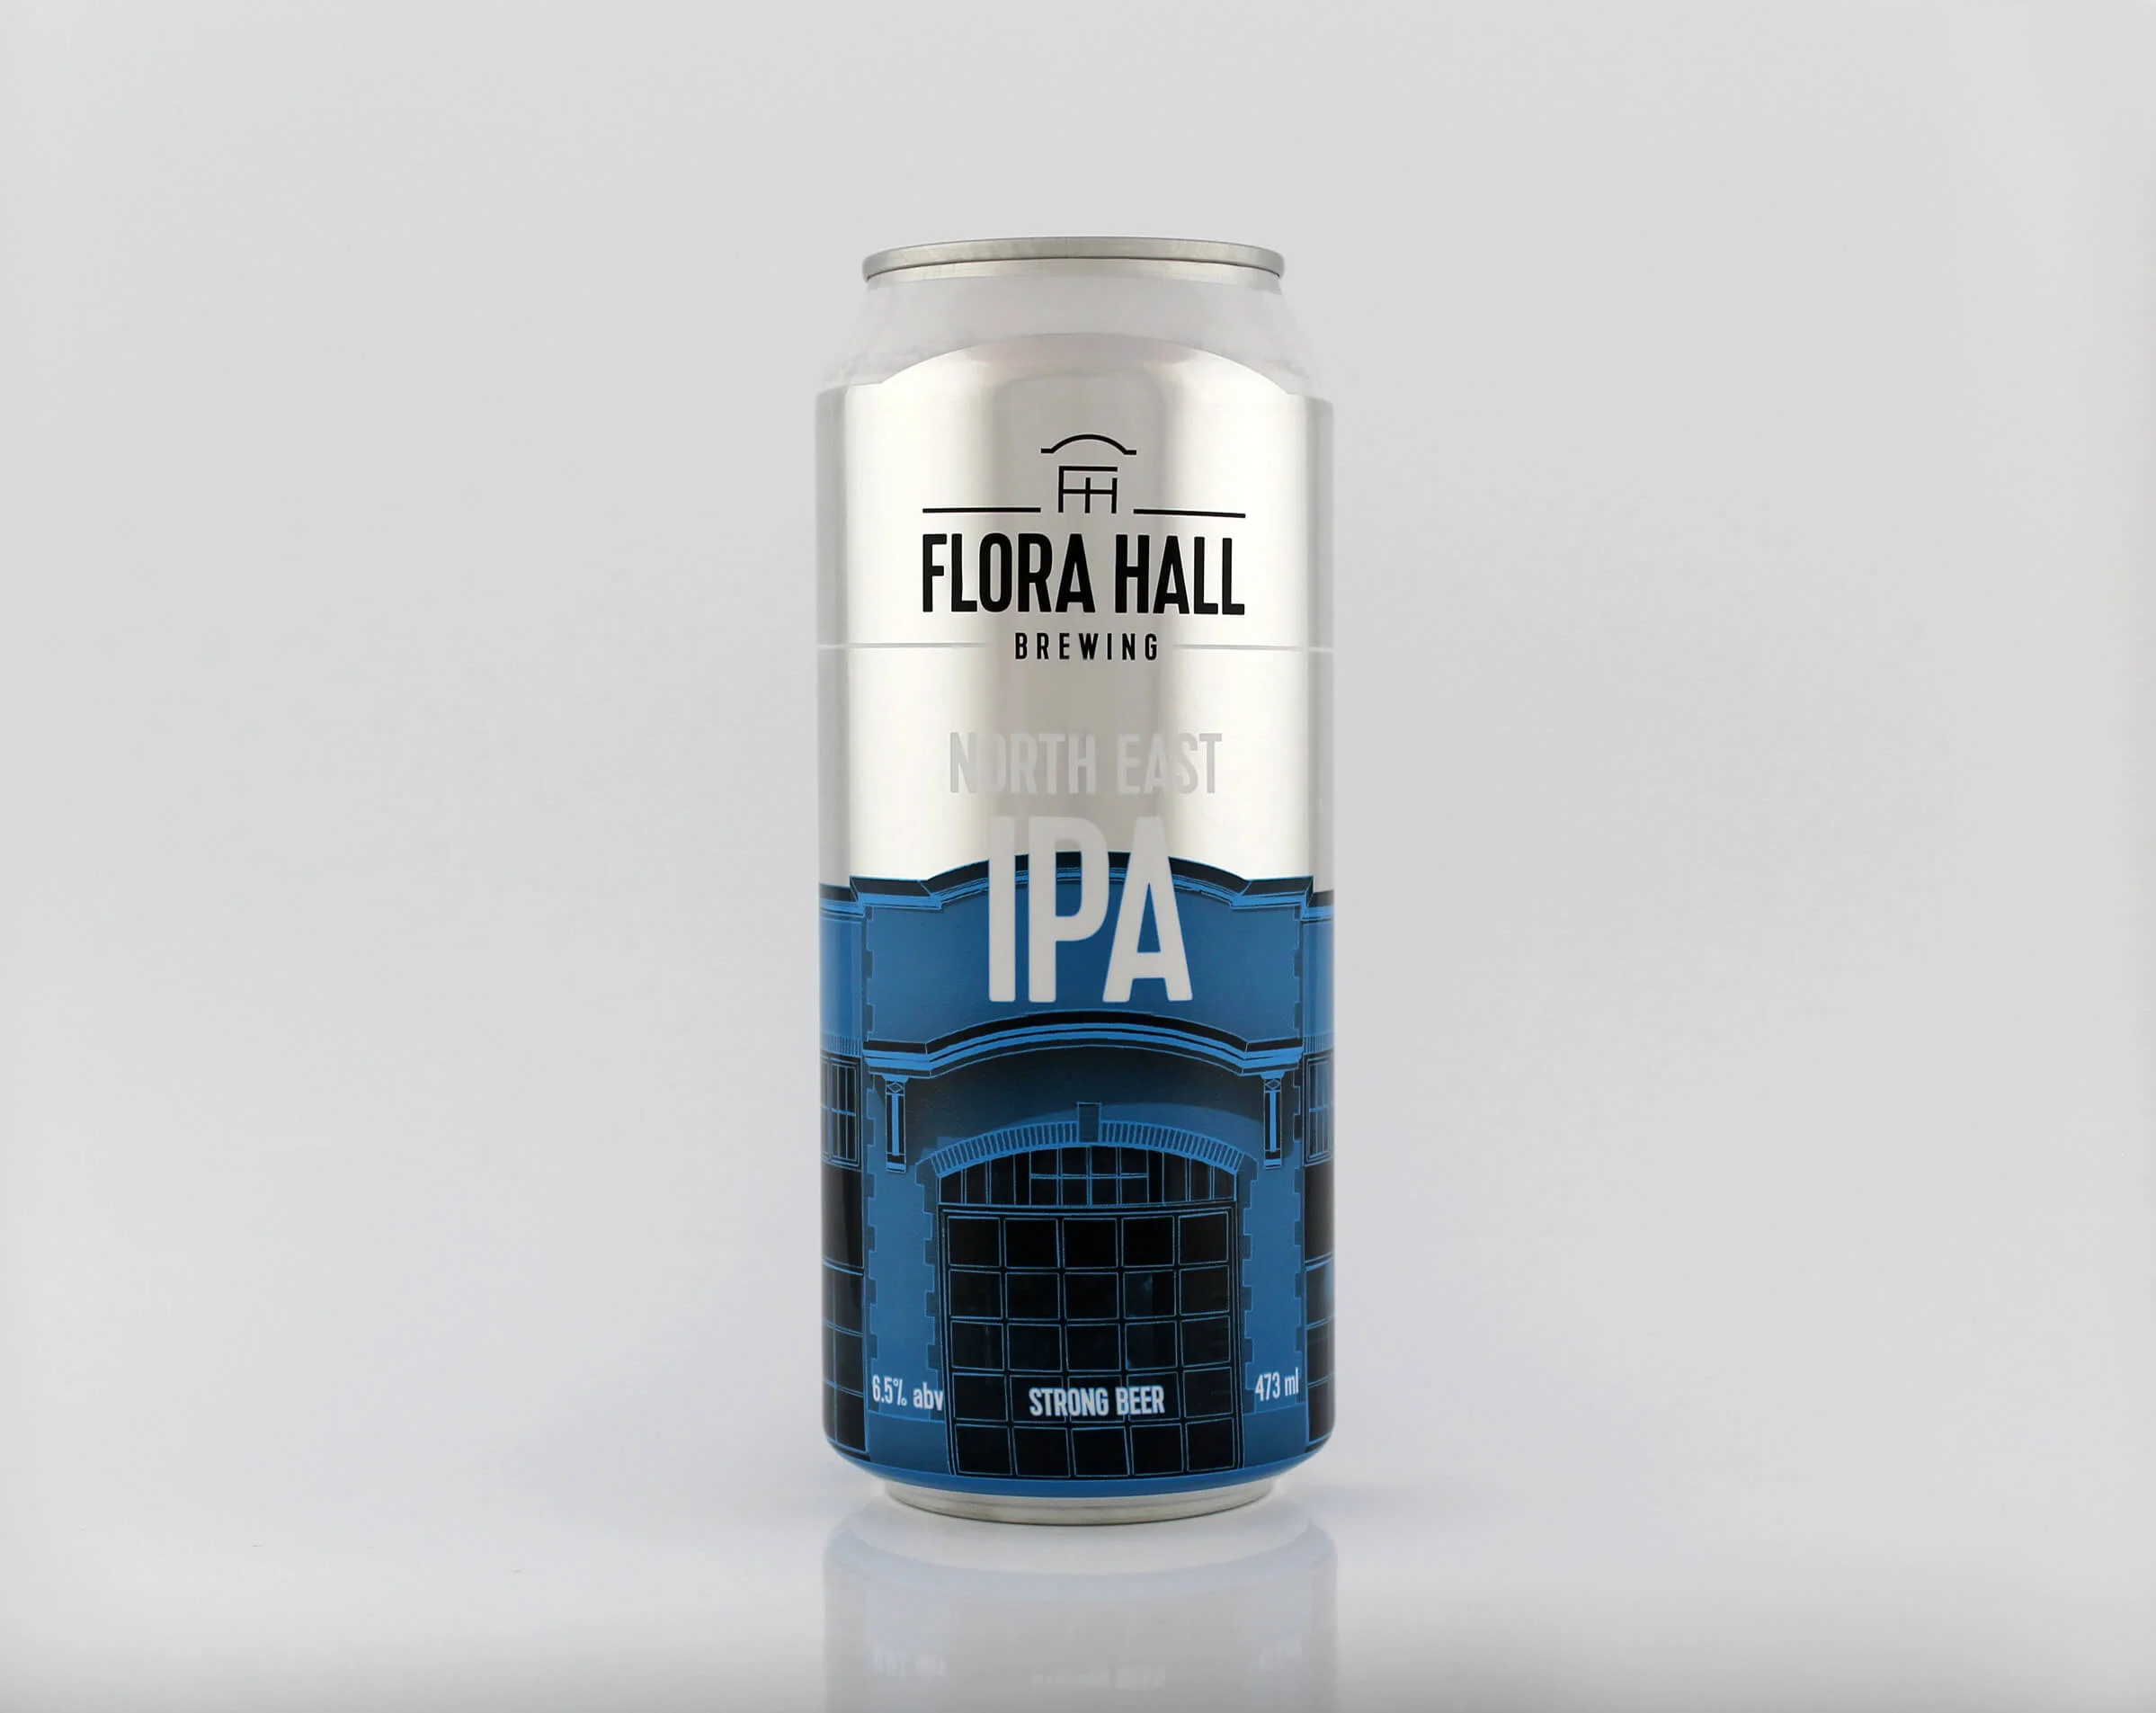 Beer can design for Flora Hall Brewing by Ottawa graphic designer idApostle